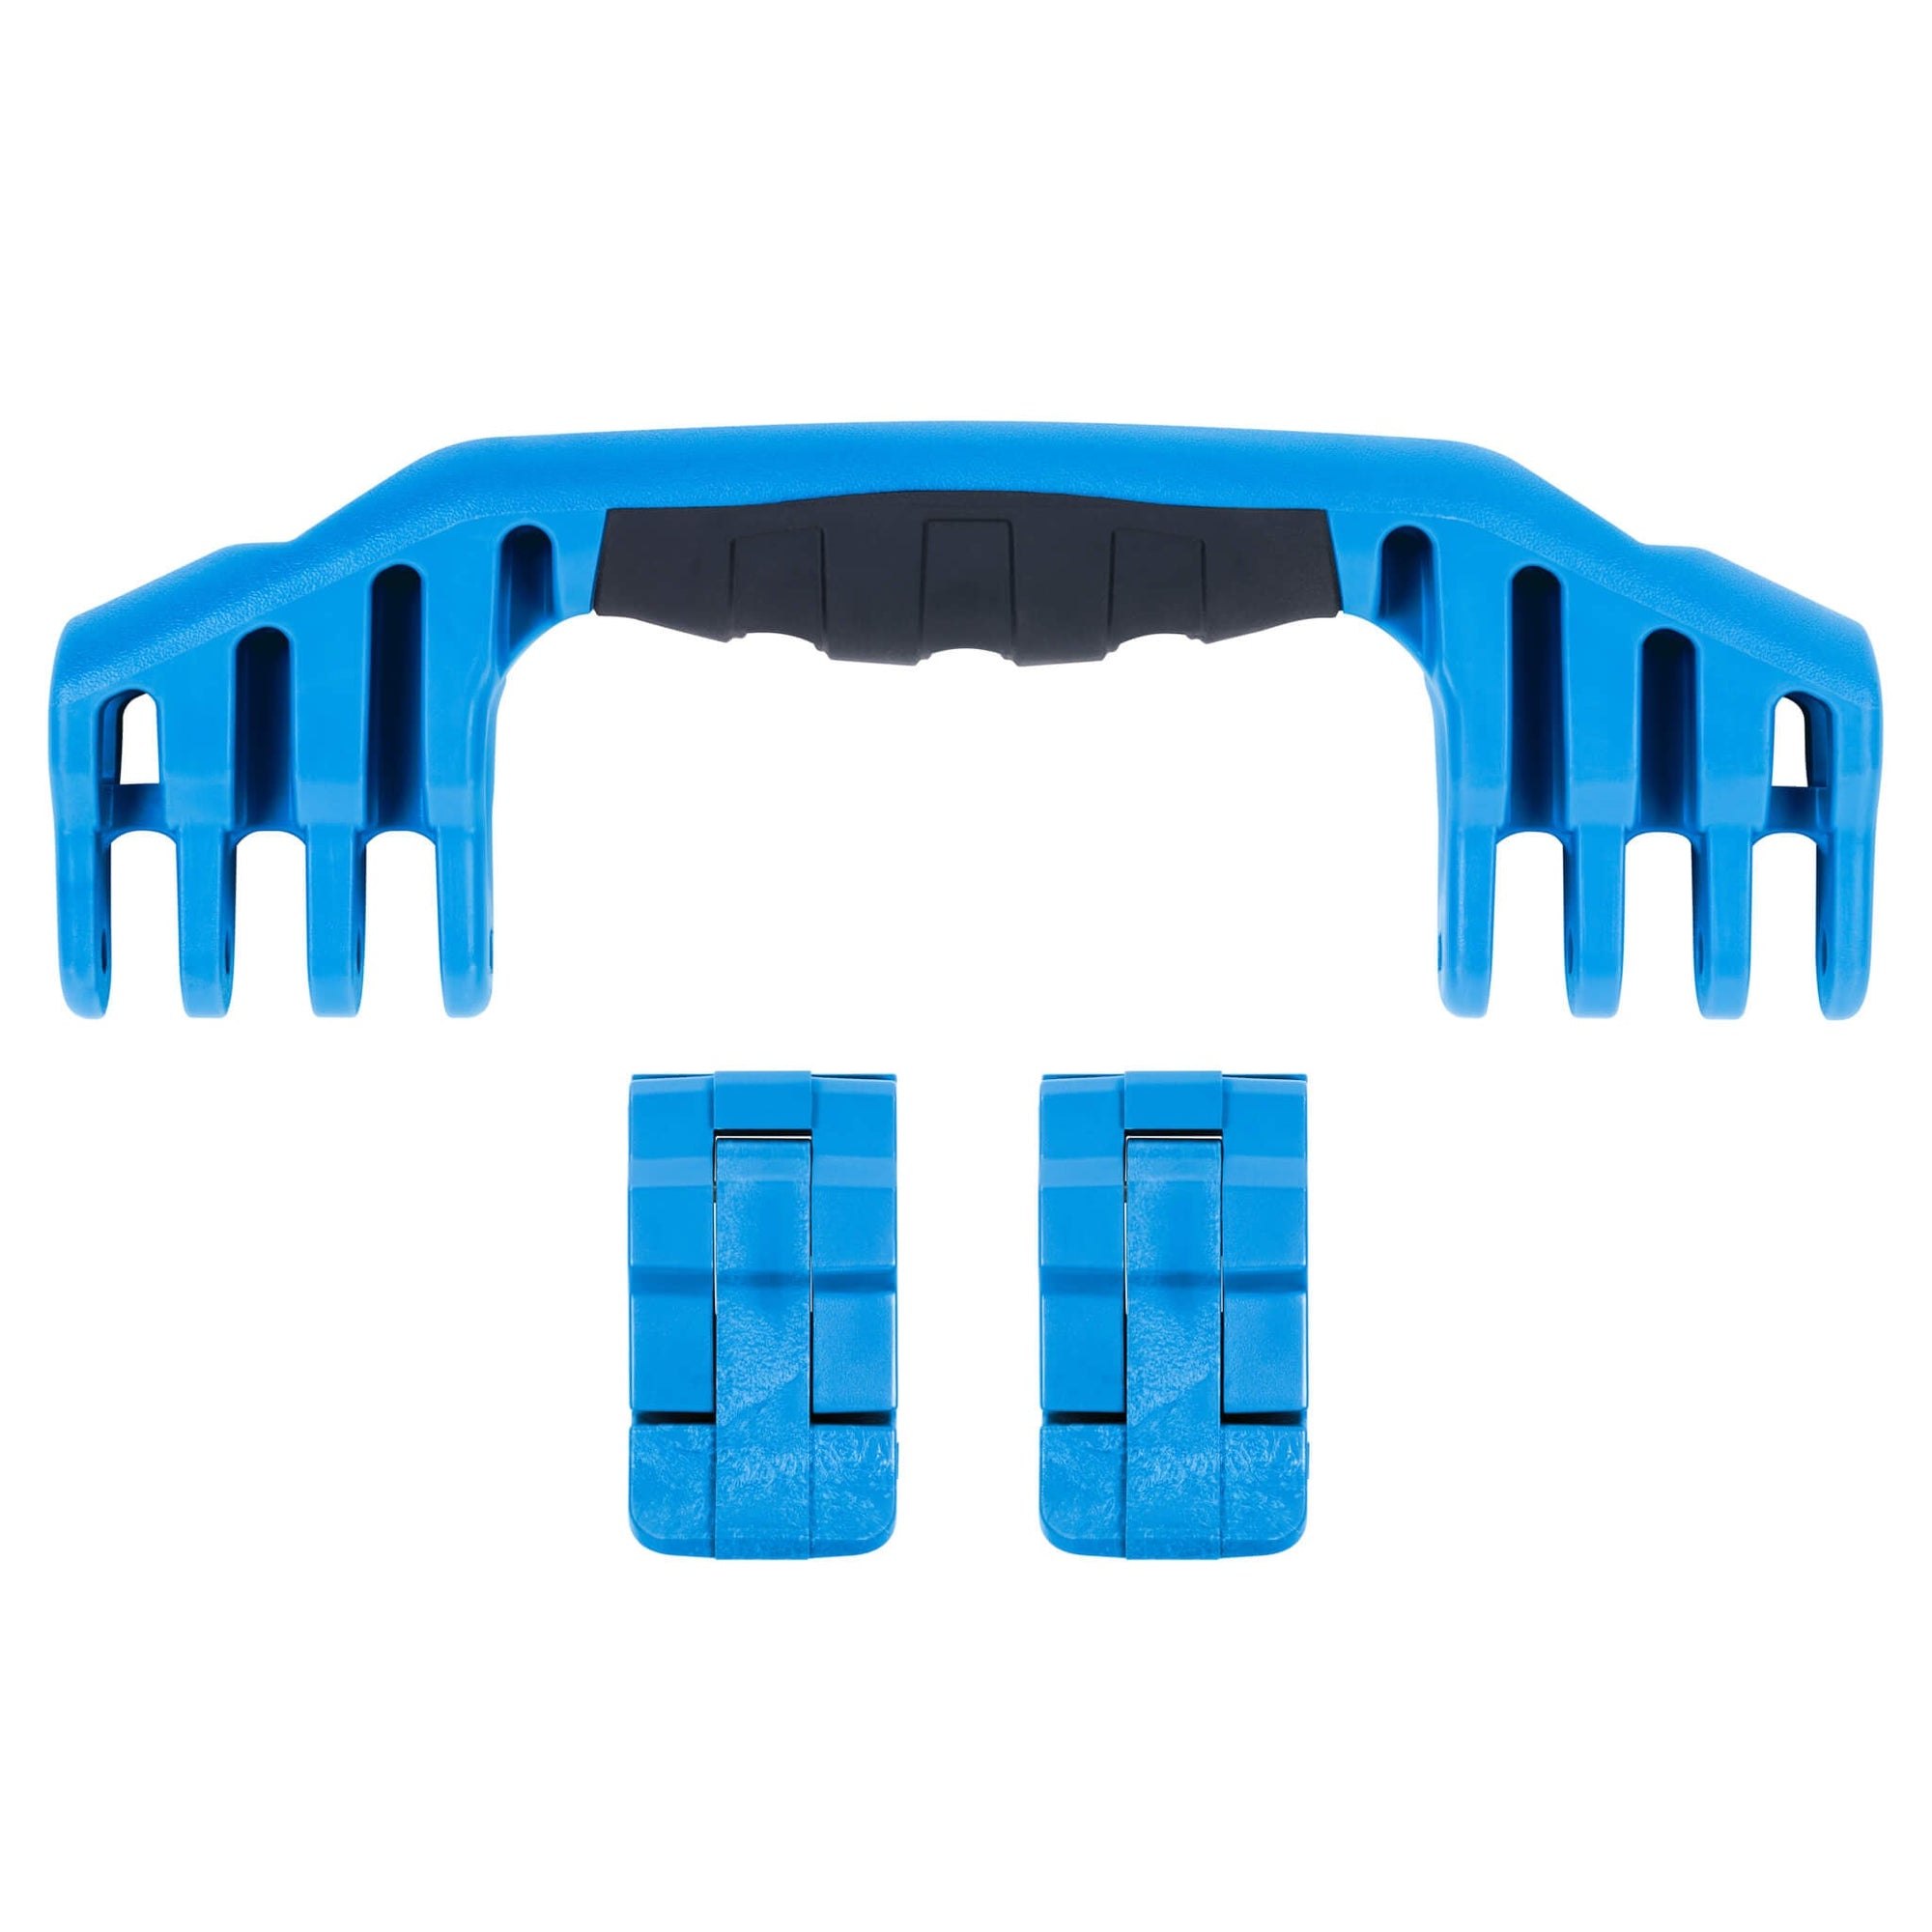 Pelican 1520 Replacement Handle & Latches, Blue (Set of 1 Handle, 2 Latches) ColorCase 